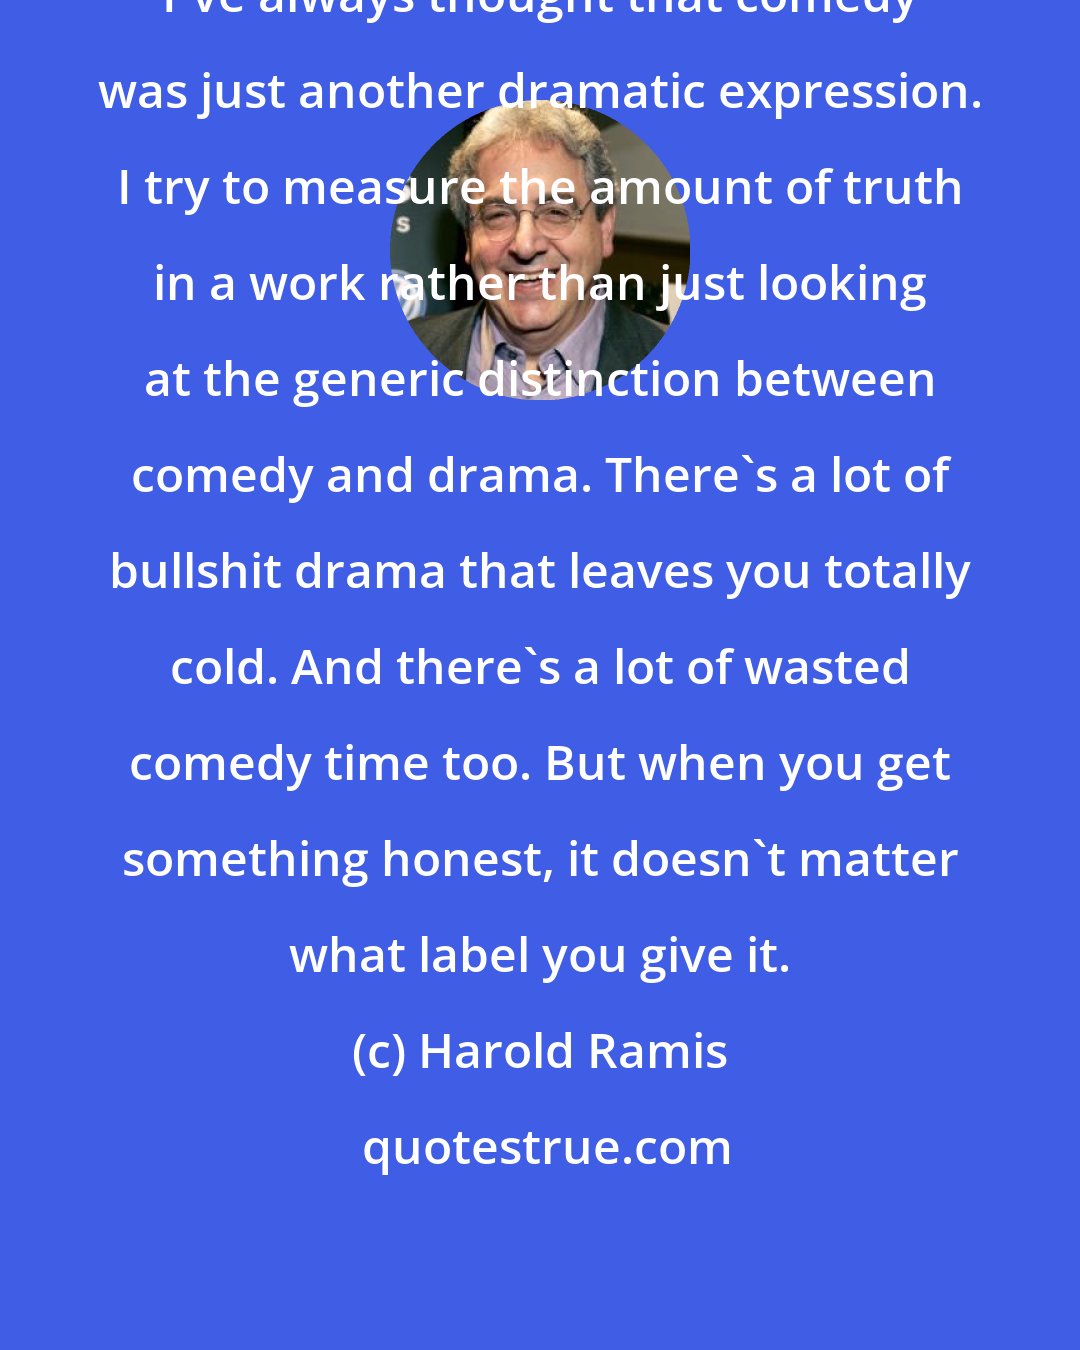 Harold Ramis: I've always thought that comedy was just another dramatic expression. I try to measure the amount of truth in a work rather than just looking at the generic distinction between comedy and drama. There's a lot of bullshit drama that leaves you totally cold. And there's a lot of wasted comedy time too. But when you get something honest, it doesn't matter what label you give it.